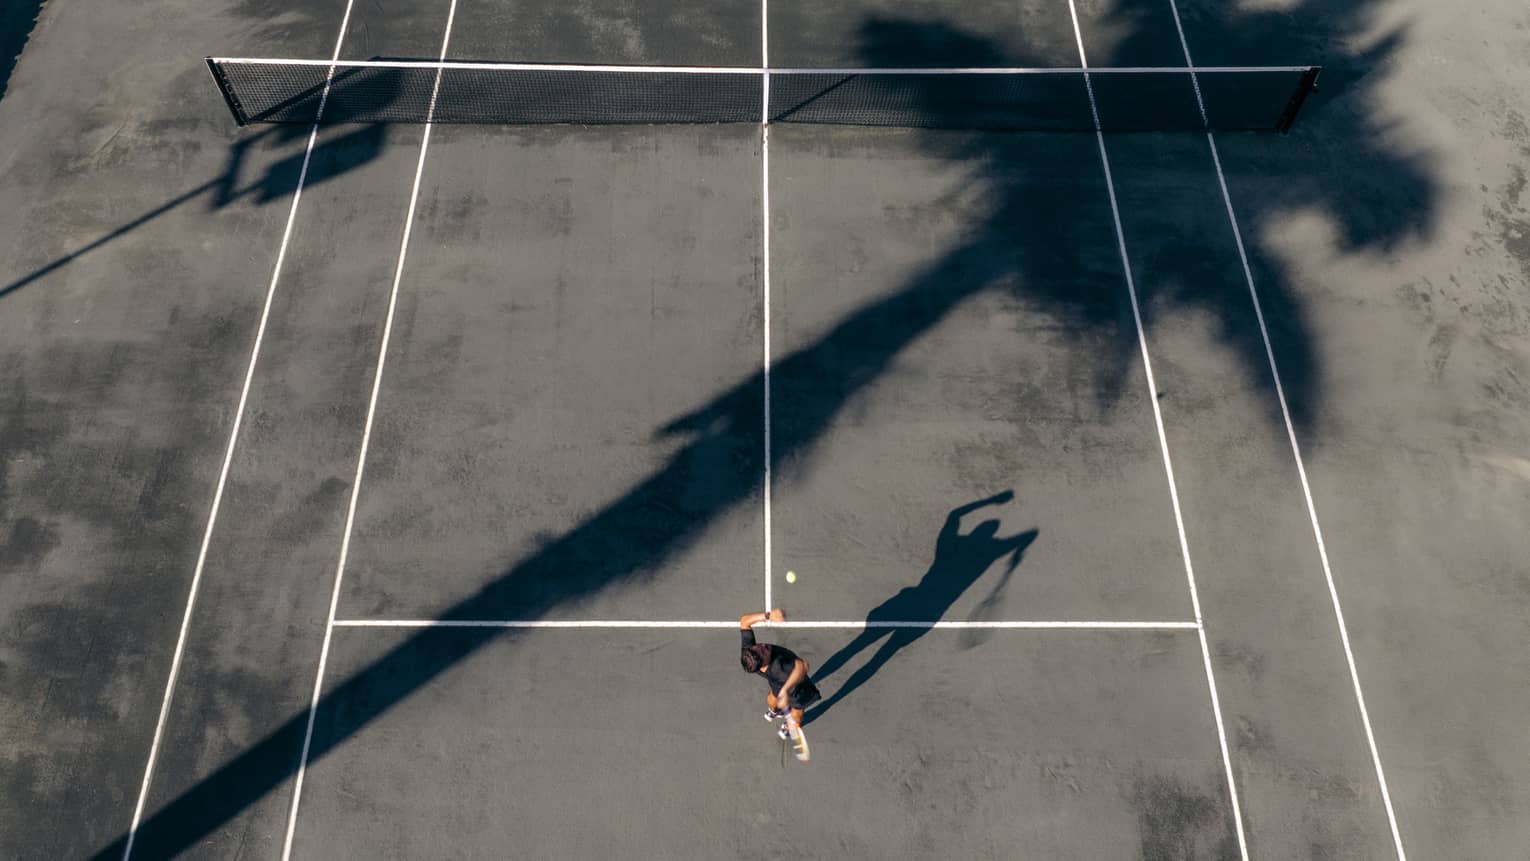 Aerial view of person serving the ball on a clay tennis court